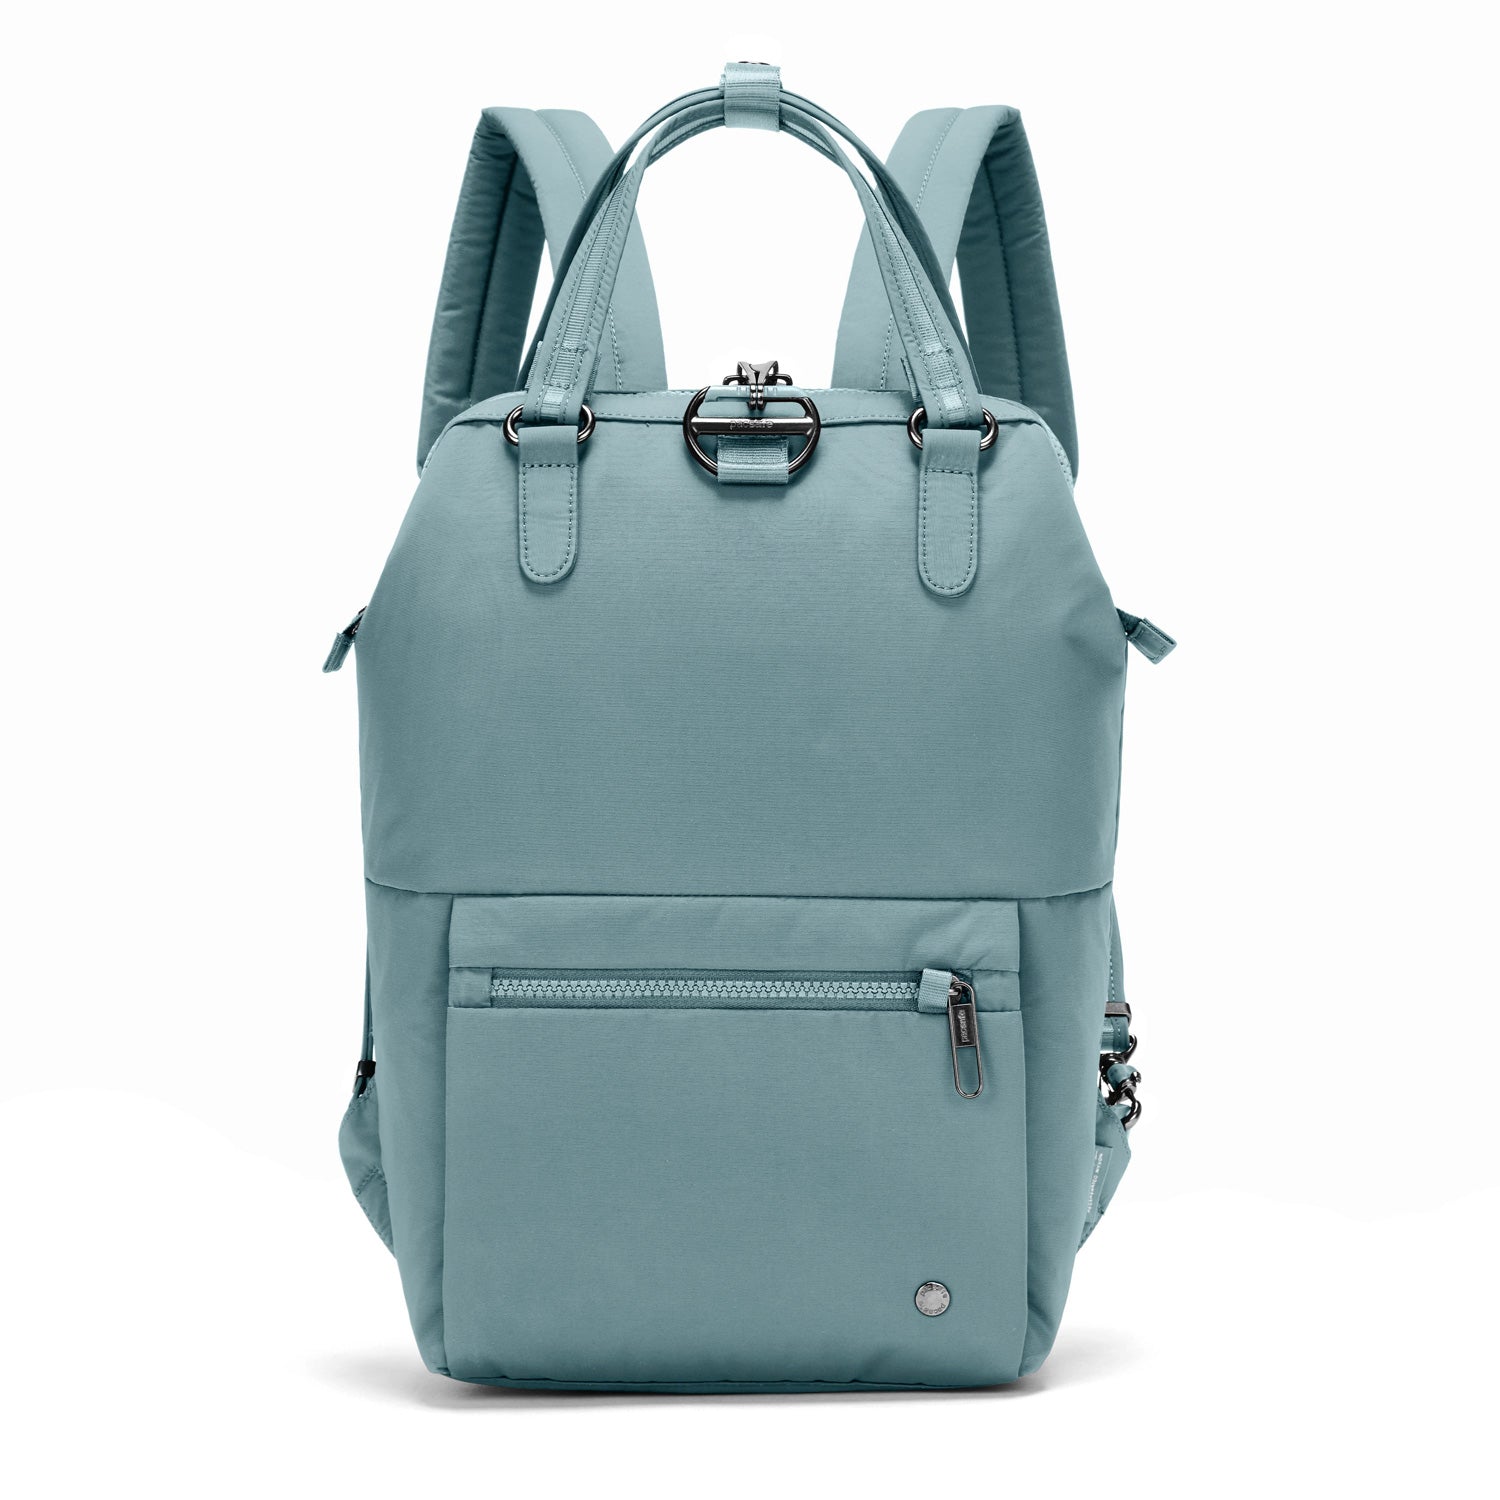 Lungarno | Women's backpack in leather color natural – Il Bisonte